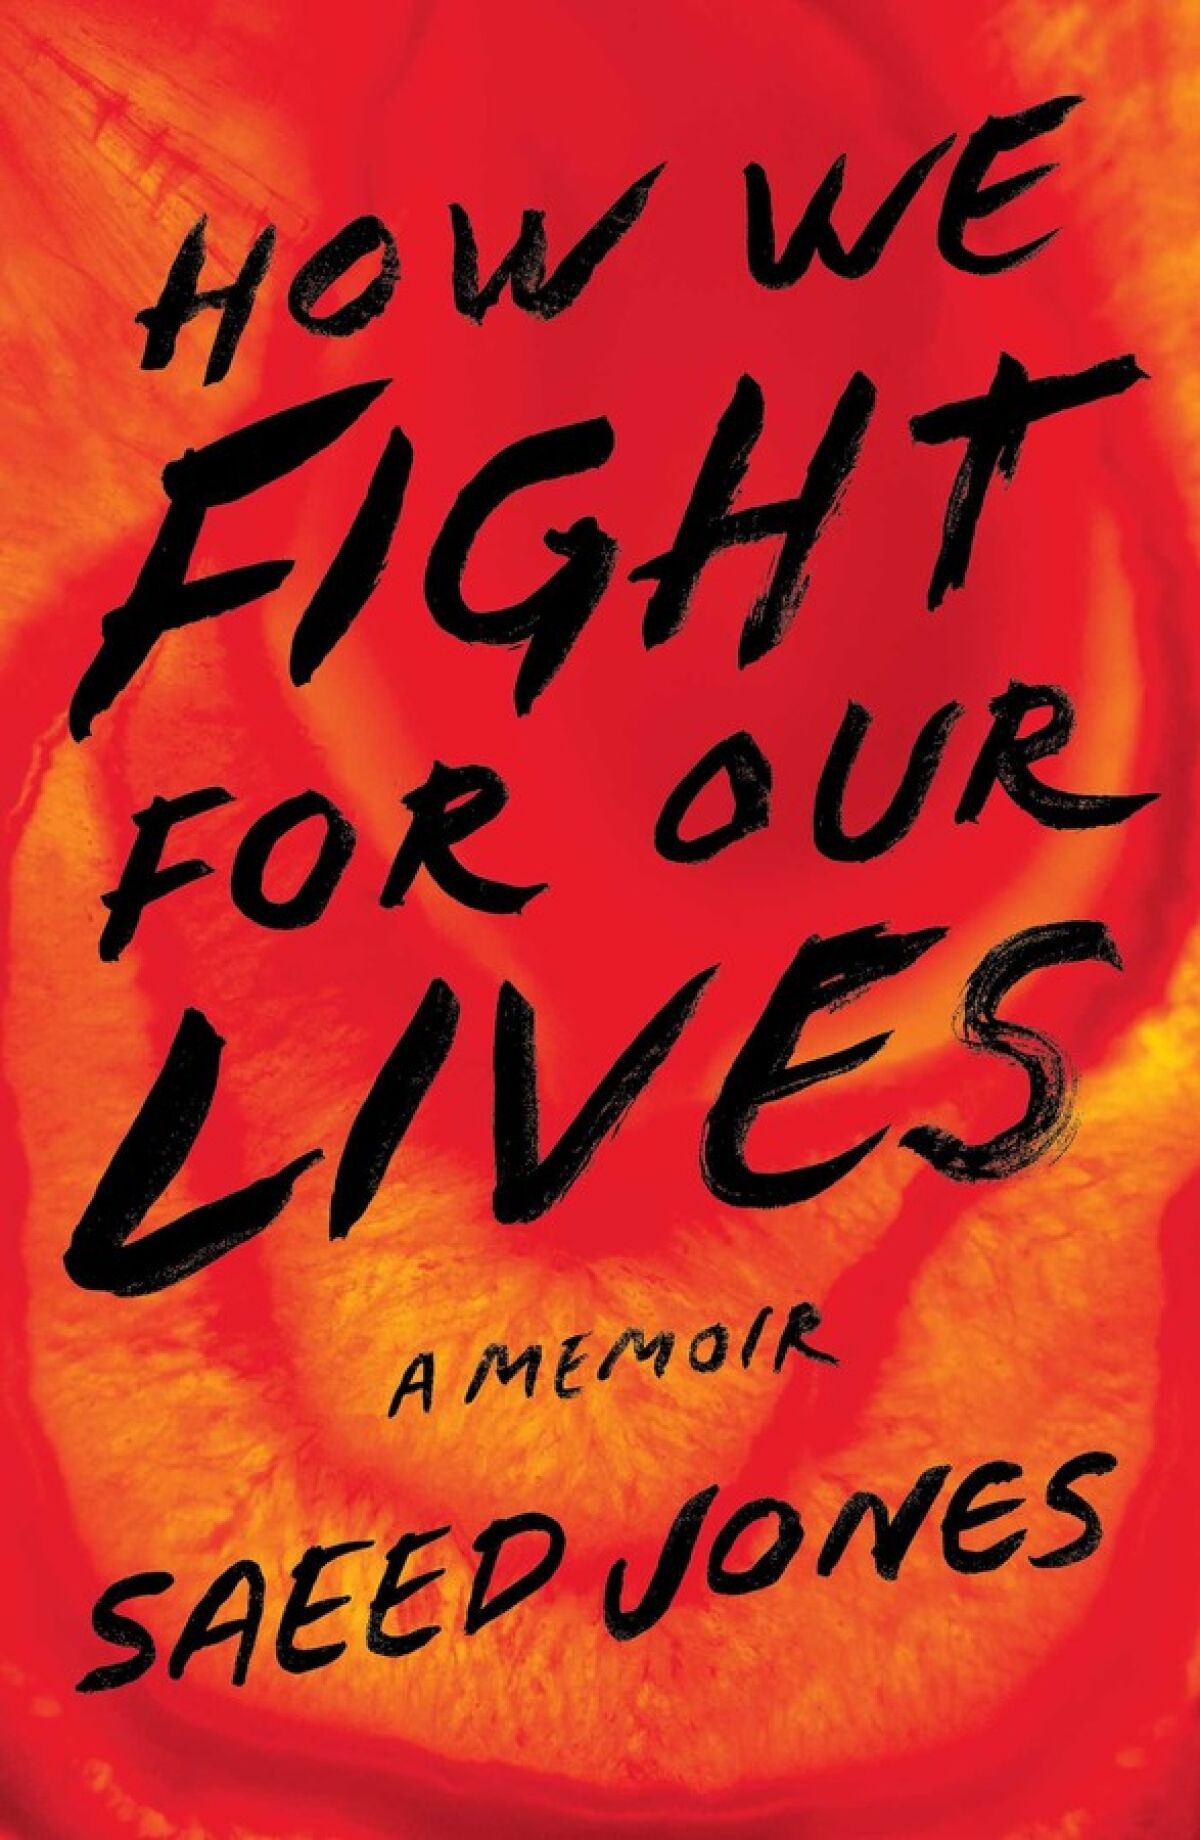 "How We Fight for Our Lives: A Memoir" by Saeed Jones.